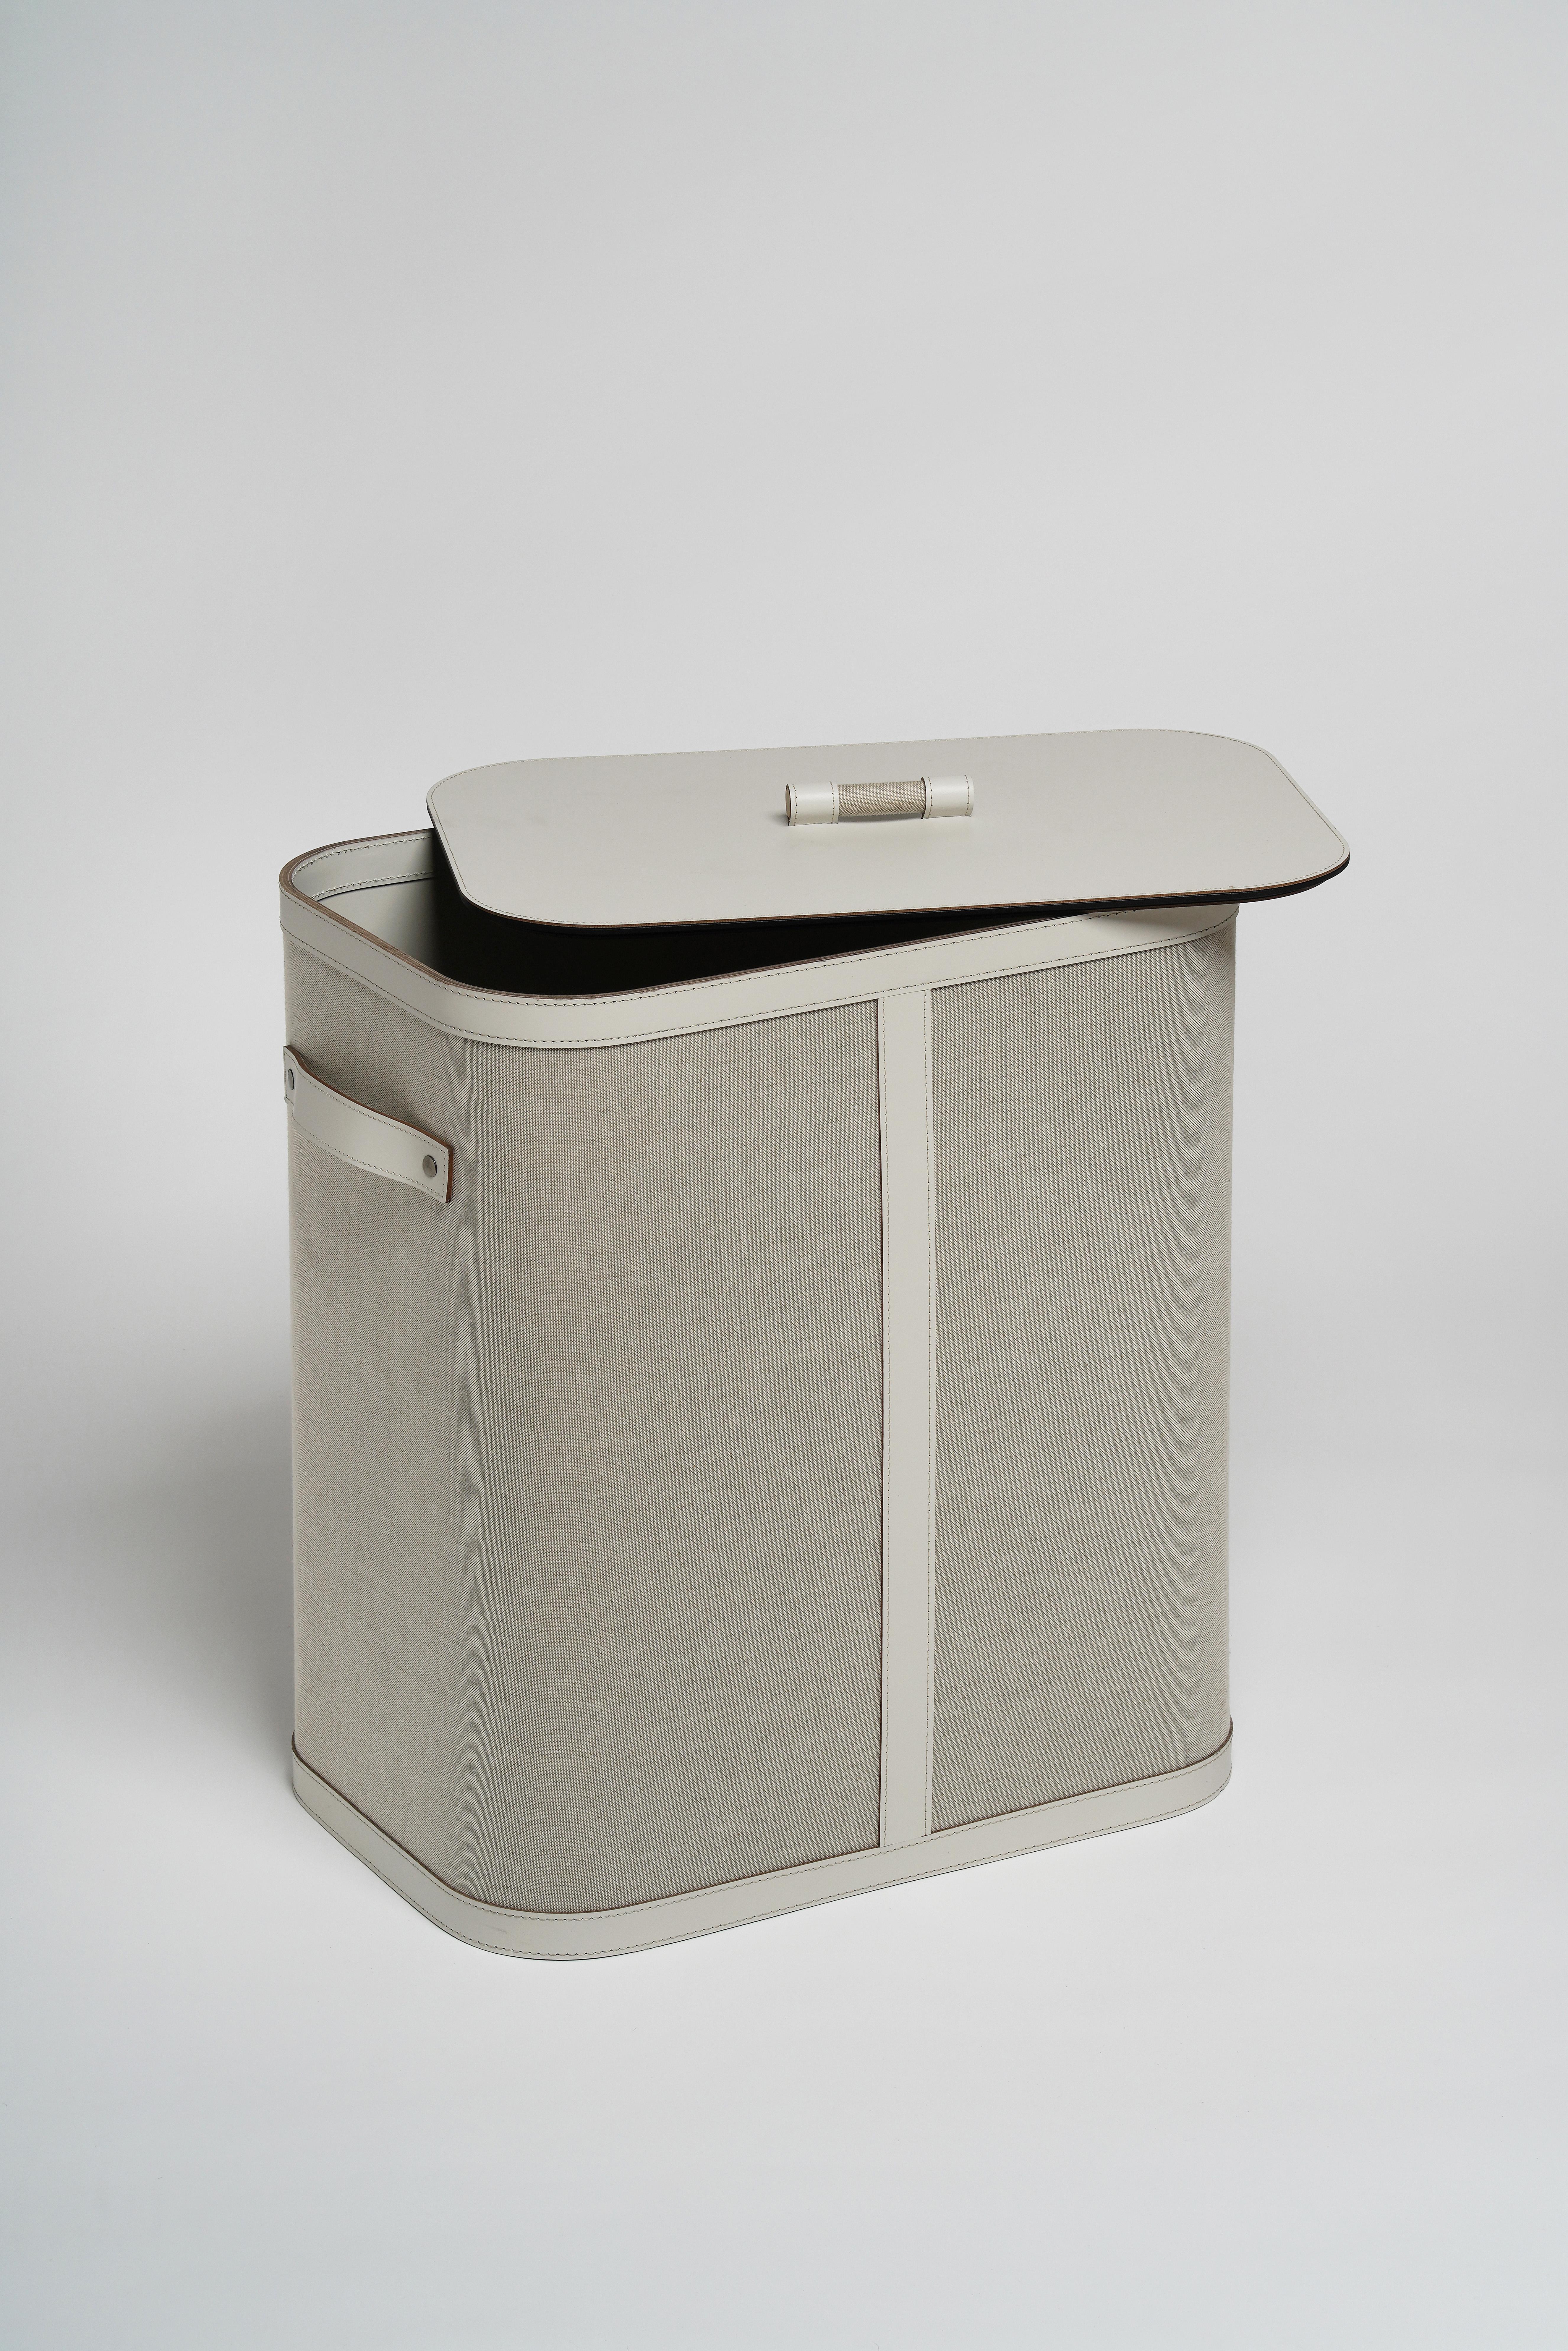 Handcrafted of upcycled leather and textiles, this stunning laundry basket has a bold rectangular silhouette with curved edges and slender sides. The black stitching around the white leather tip on top, bottom, and handles stand out against the soft